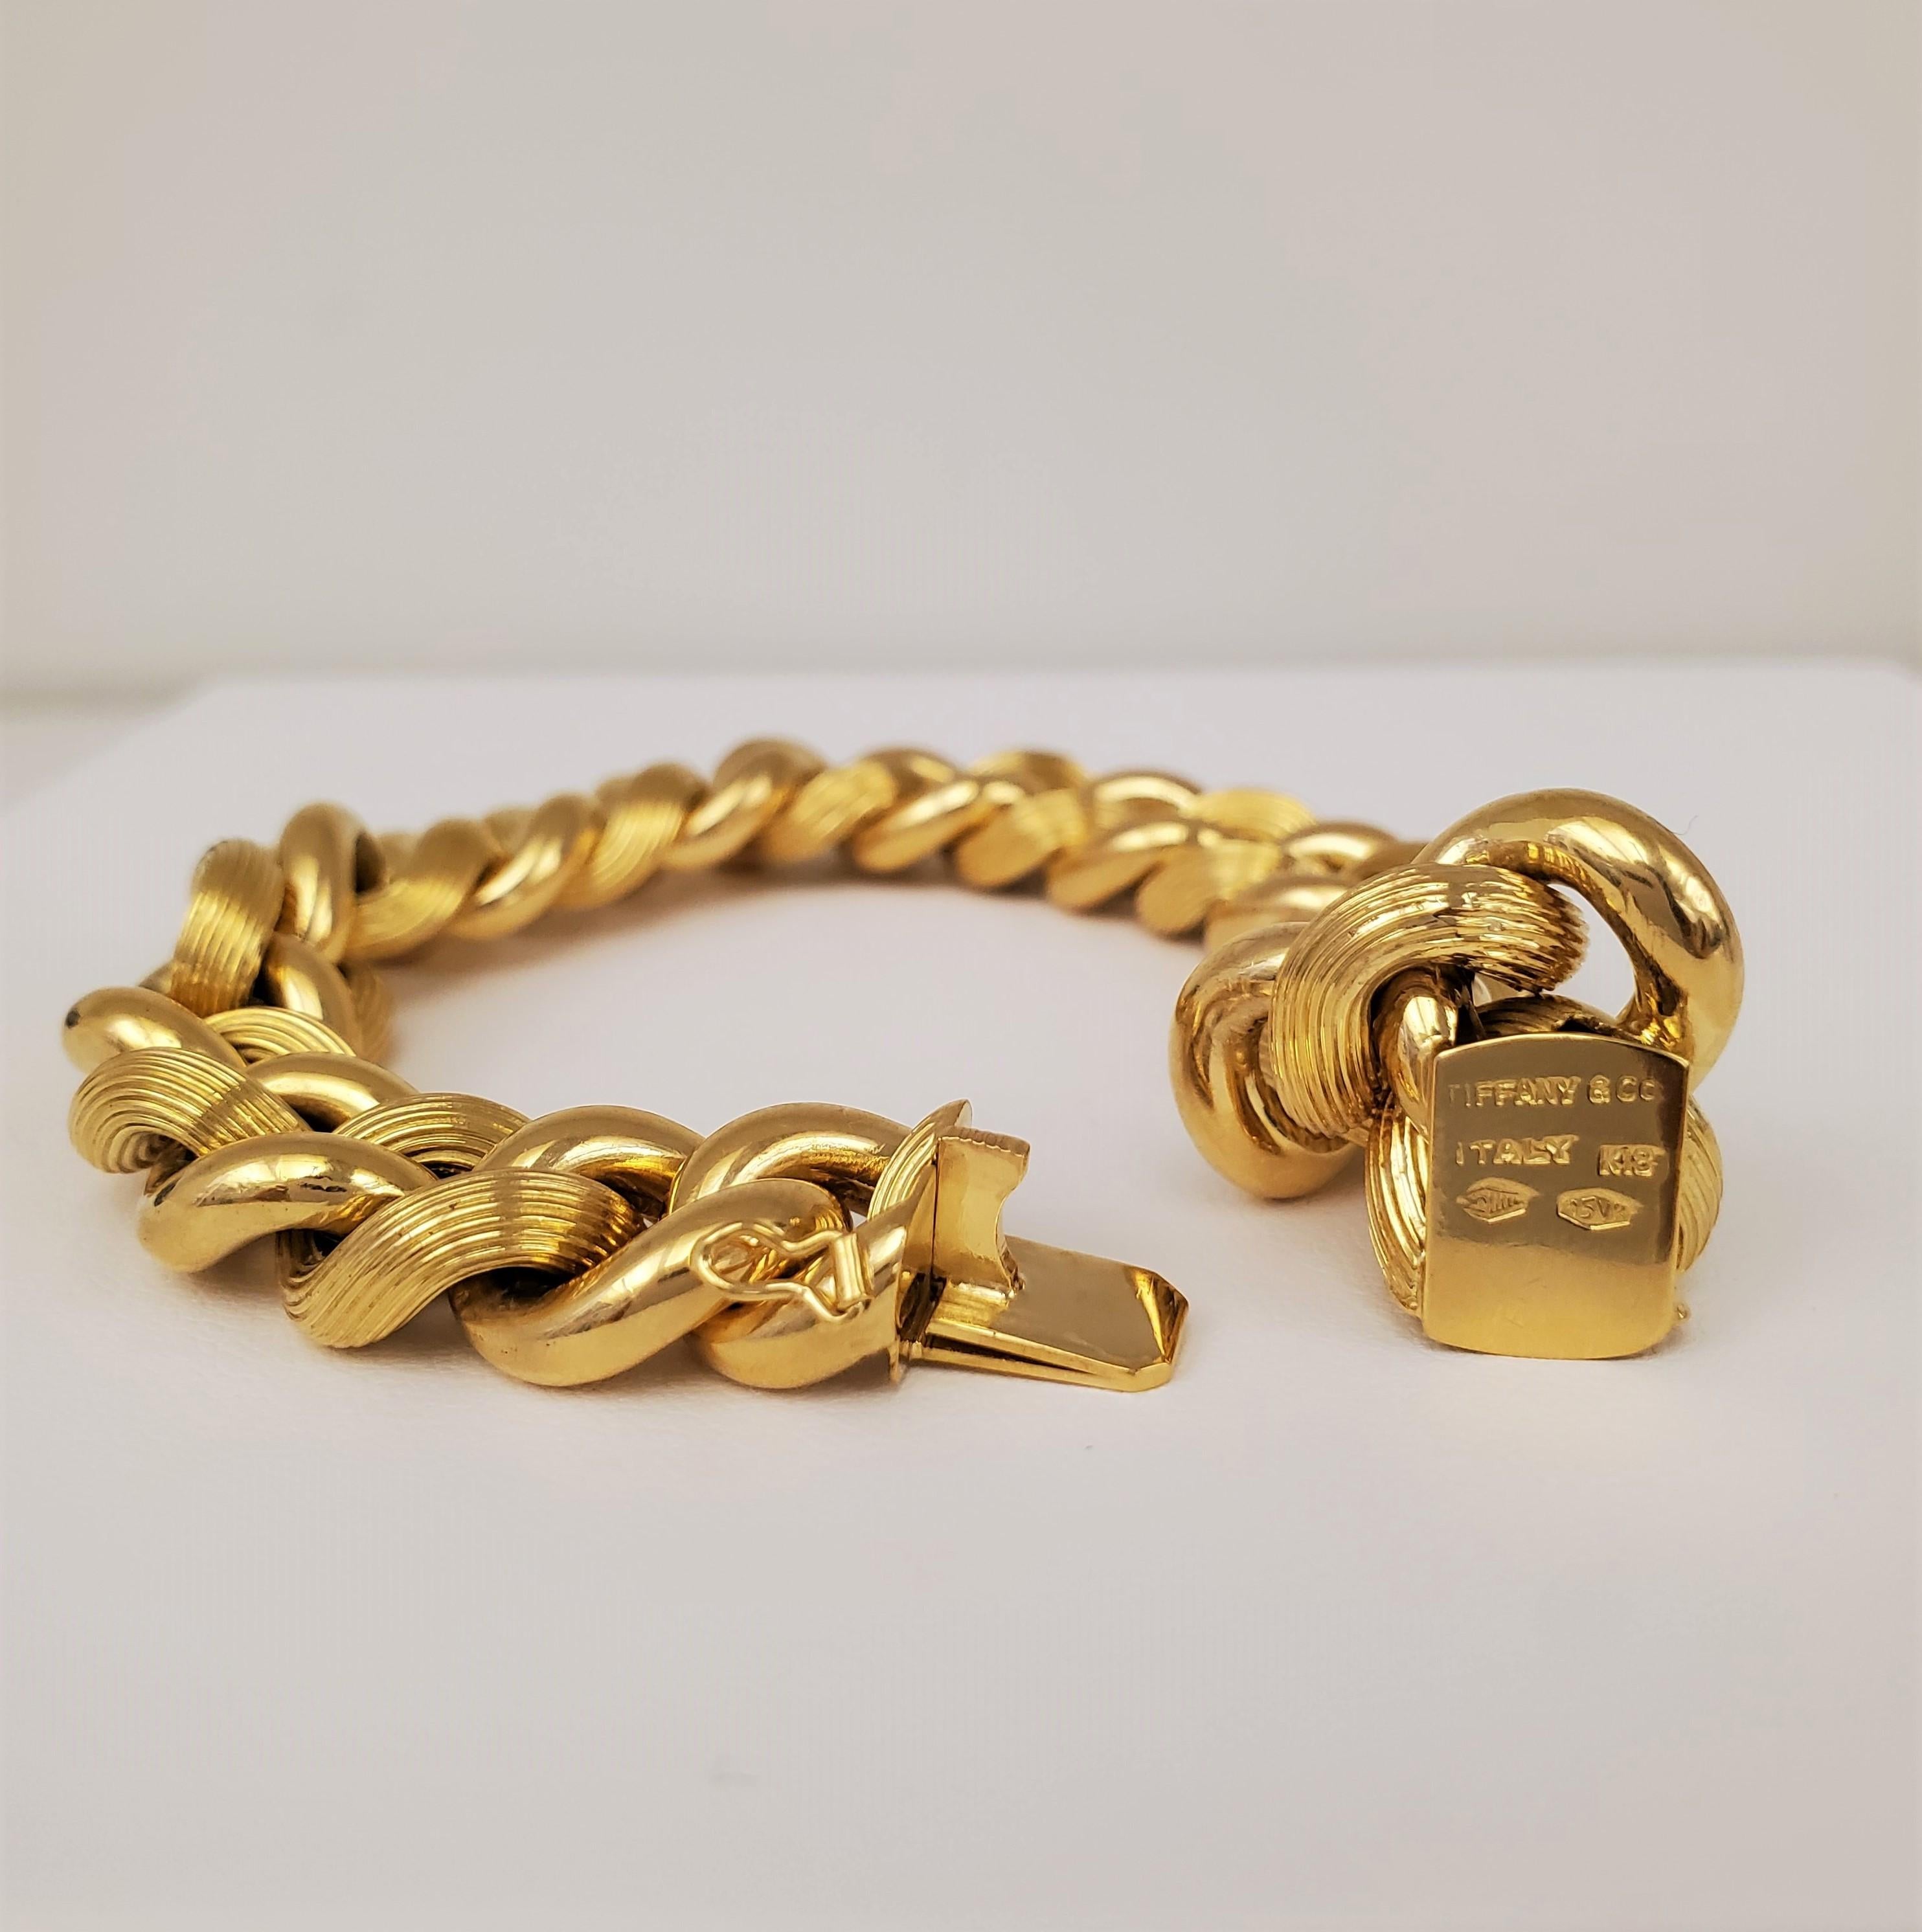 Authentic classic Tiffany & Co. high polish link bracelet features alternating textured and smooth links. Crafted in 18 karat yellow gold. Signed Tiffany & Co., Italy,  K18, 750. The bracelet measures 7 1/2 inches in length. Does not come with